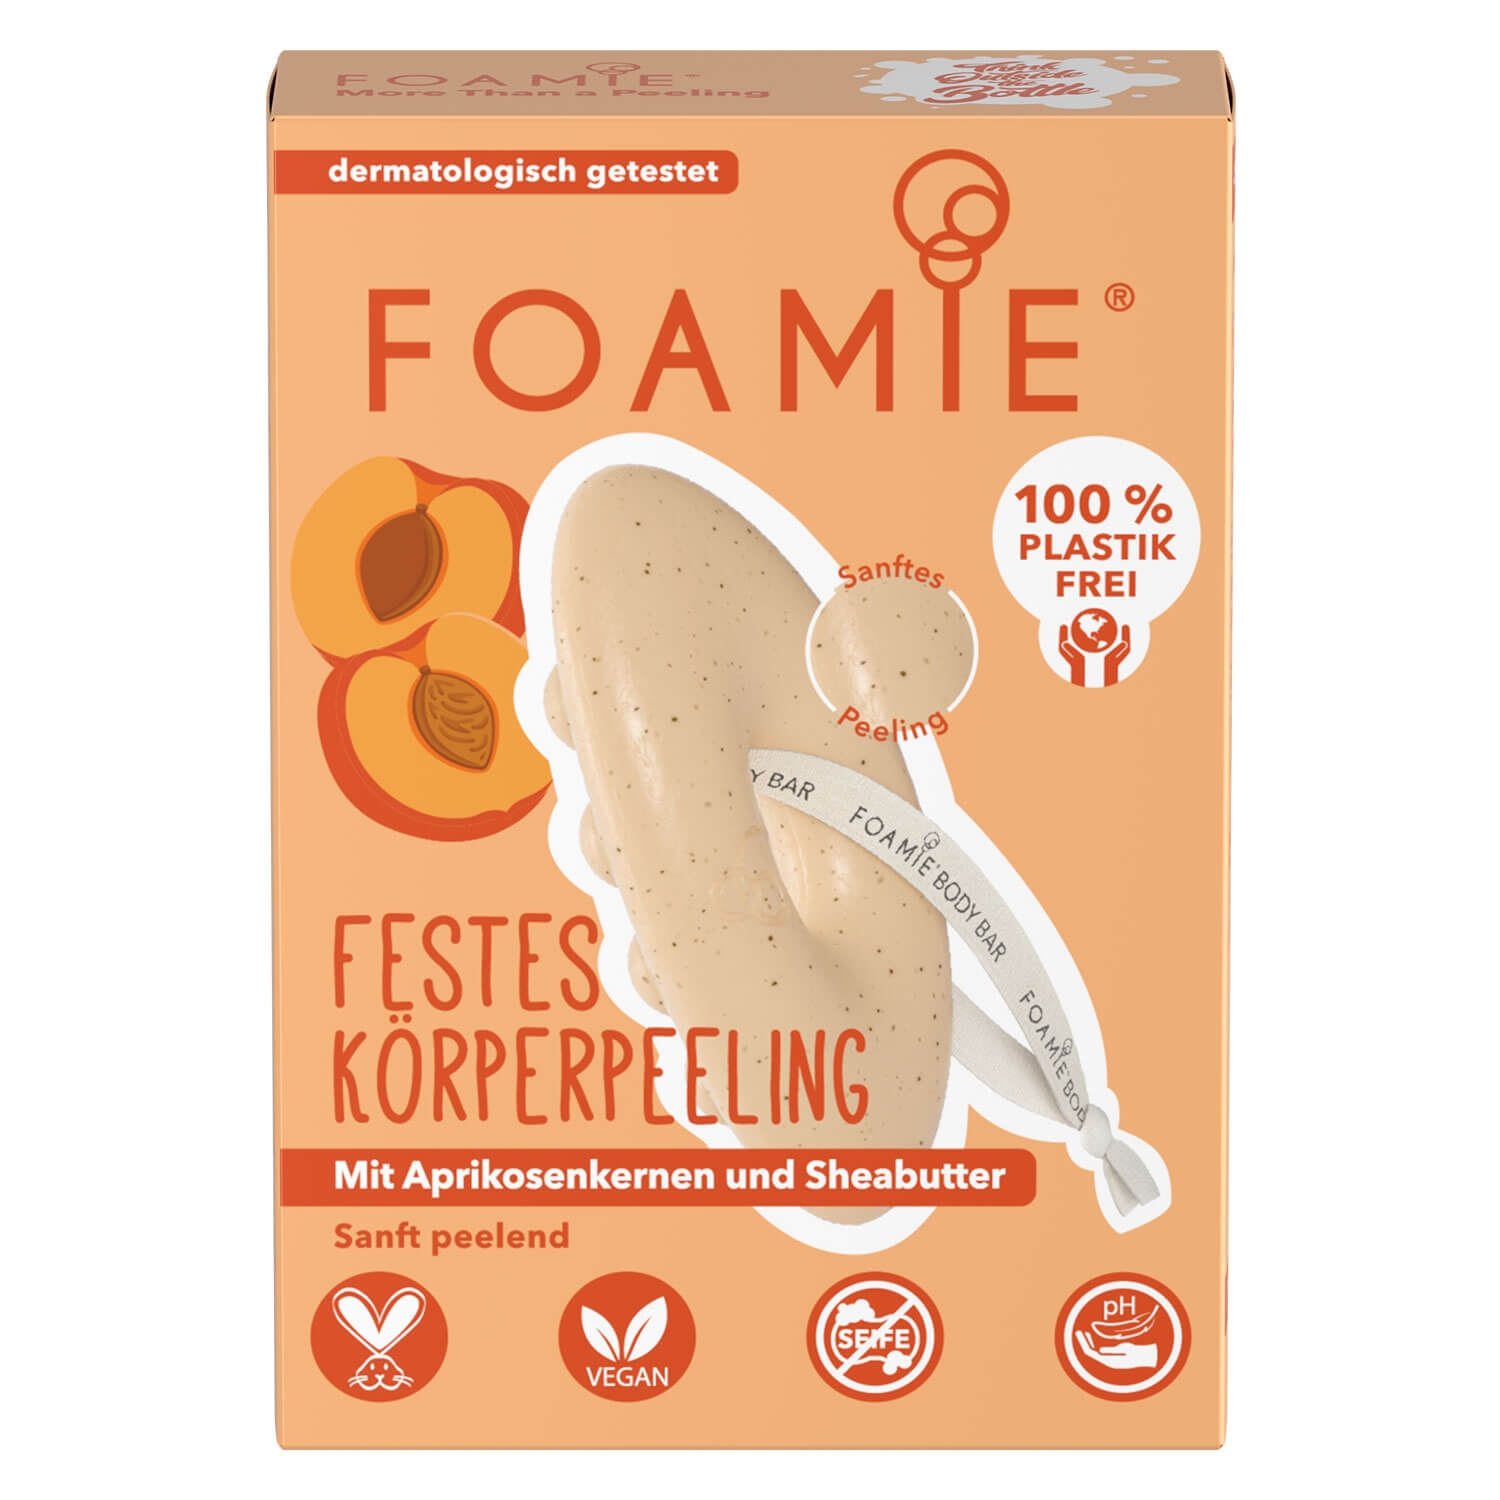 Product image from Foamie - Festes Körperpeeling More Than A Peeling